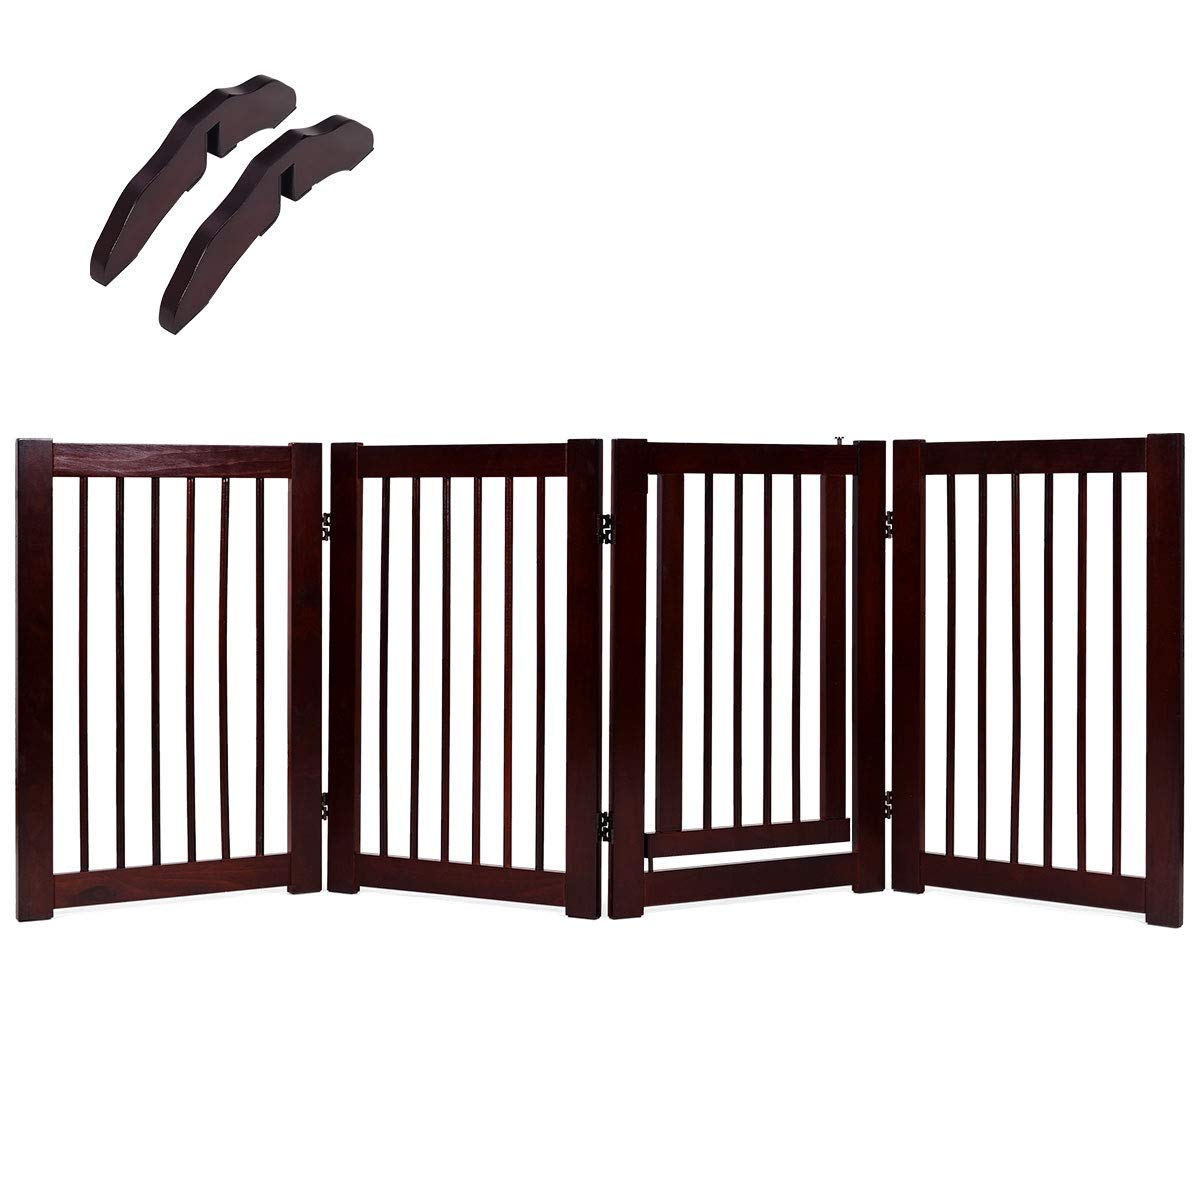 Giantex 30inch Freestanding Wood Dog Gate with Walk Through Door and 2PCS Support Feet